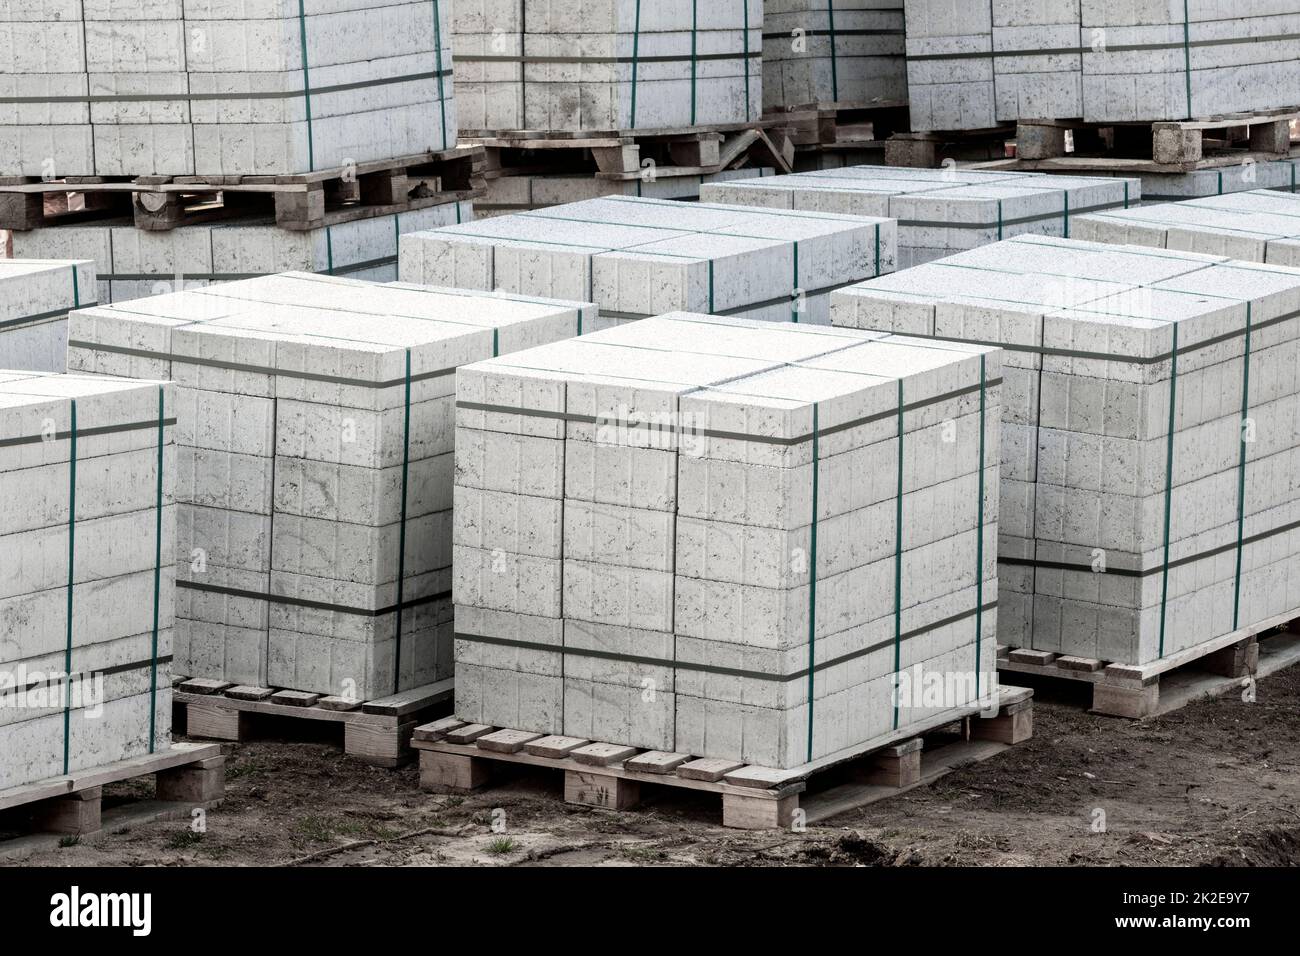 Concrete pavement tiles stacked on the wooden pallets Stock Photo